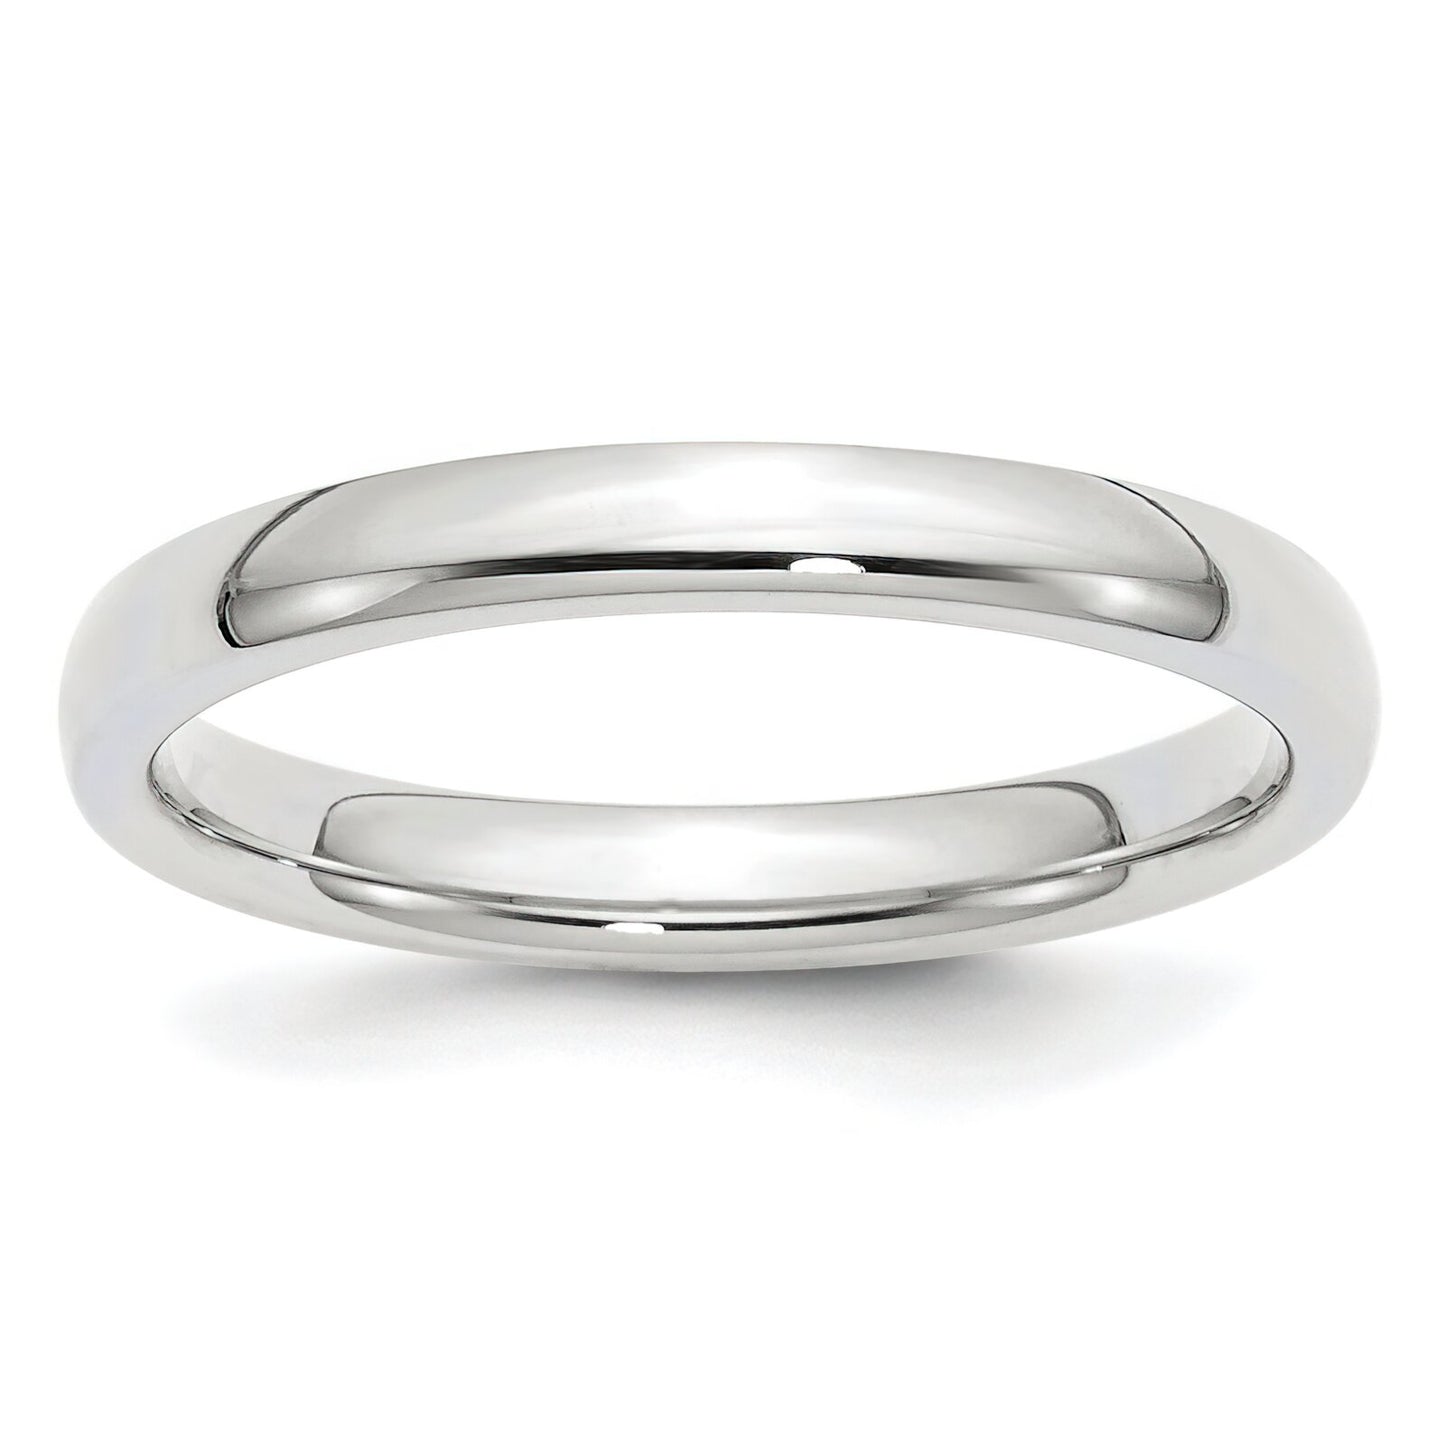 14K White Gold Comfort Fit Wedding Band